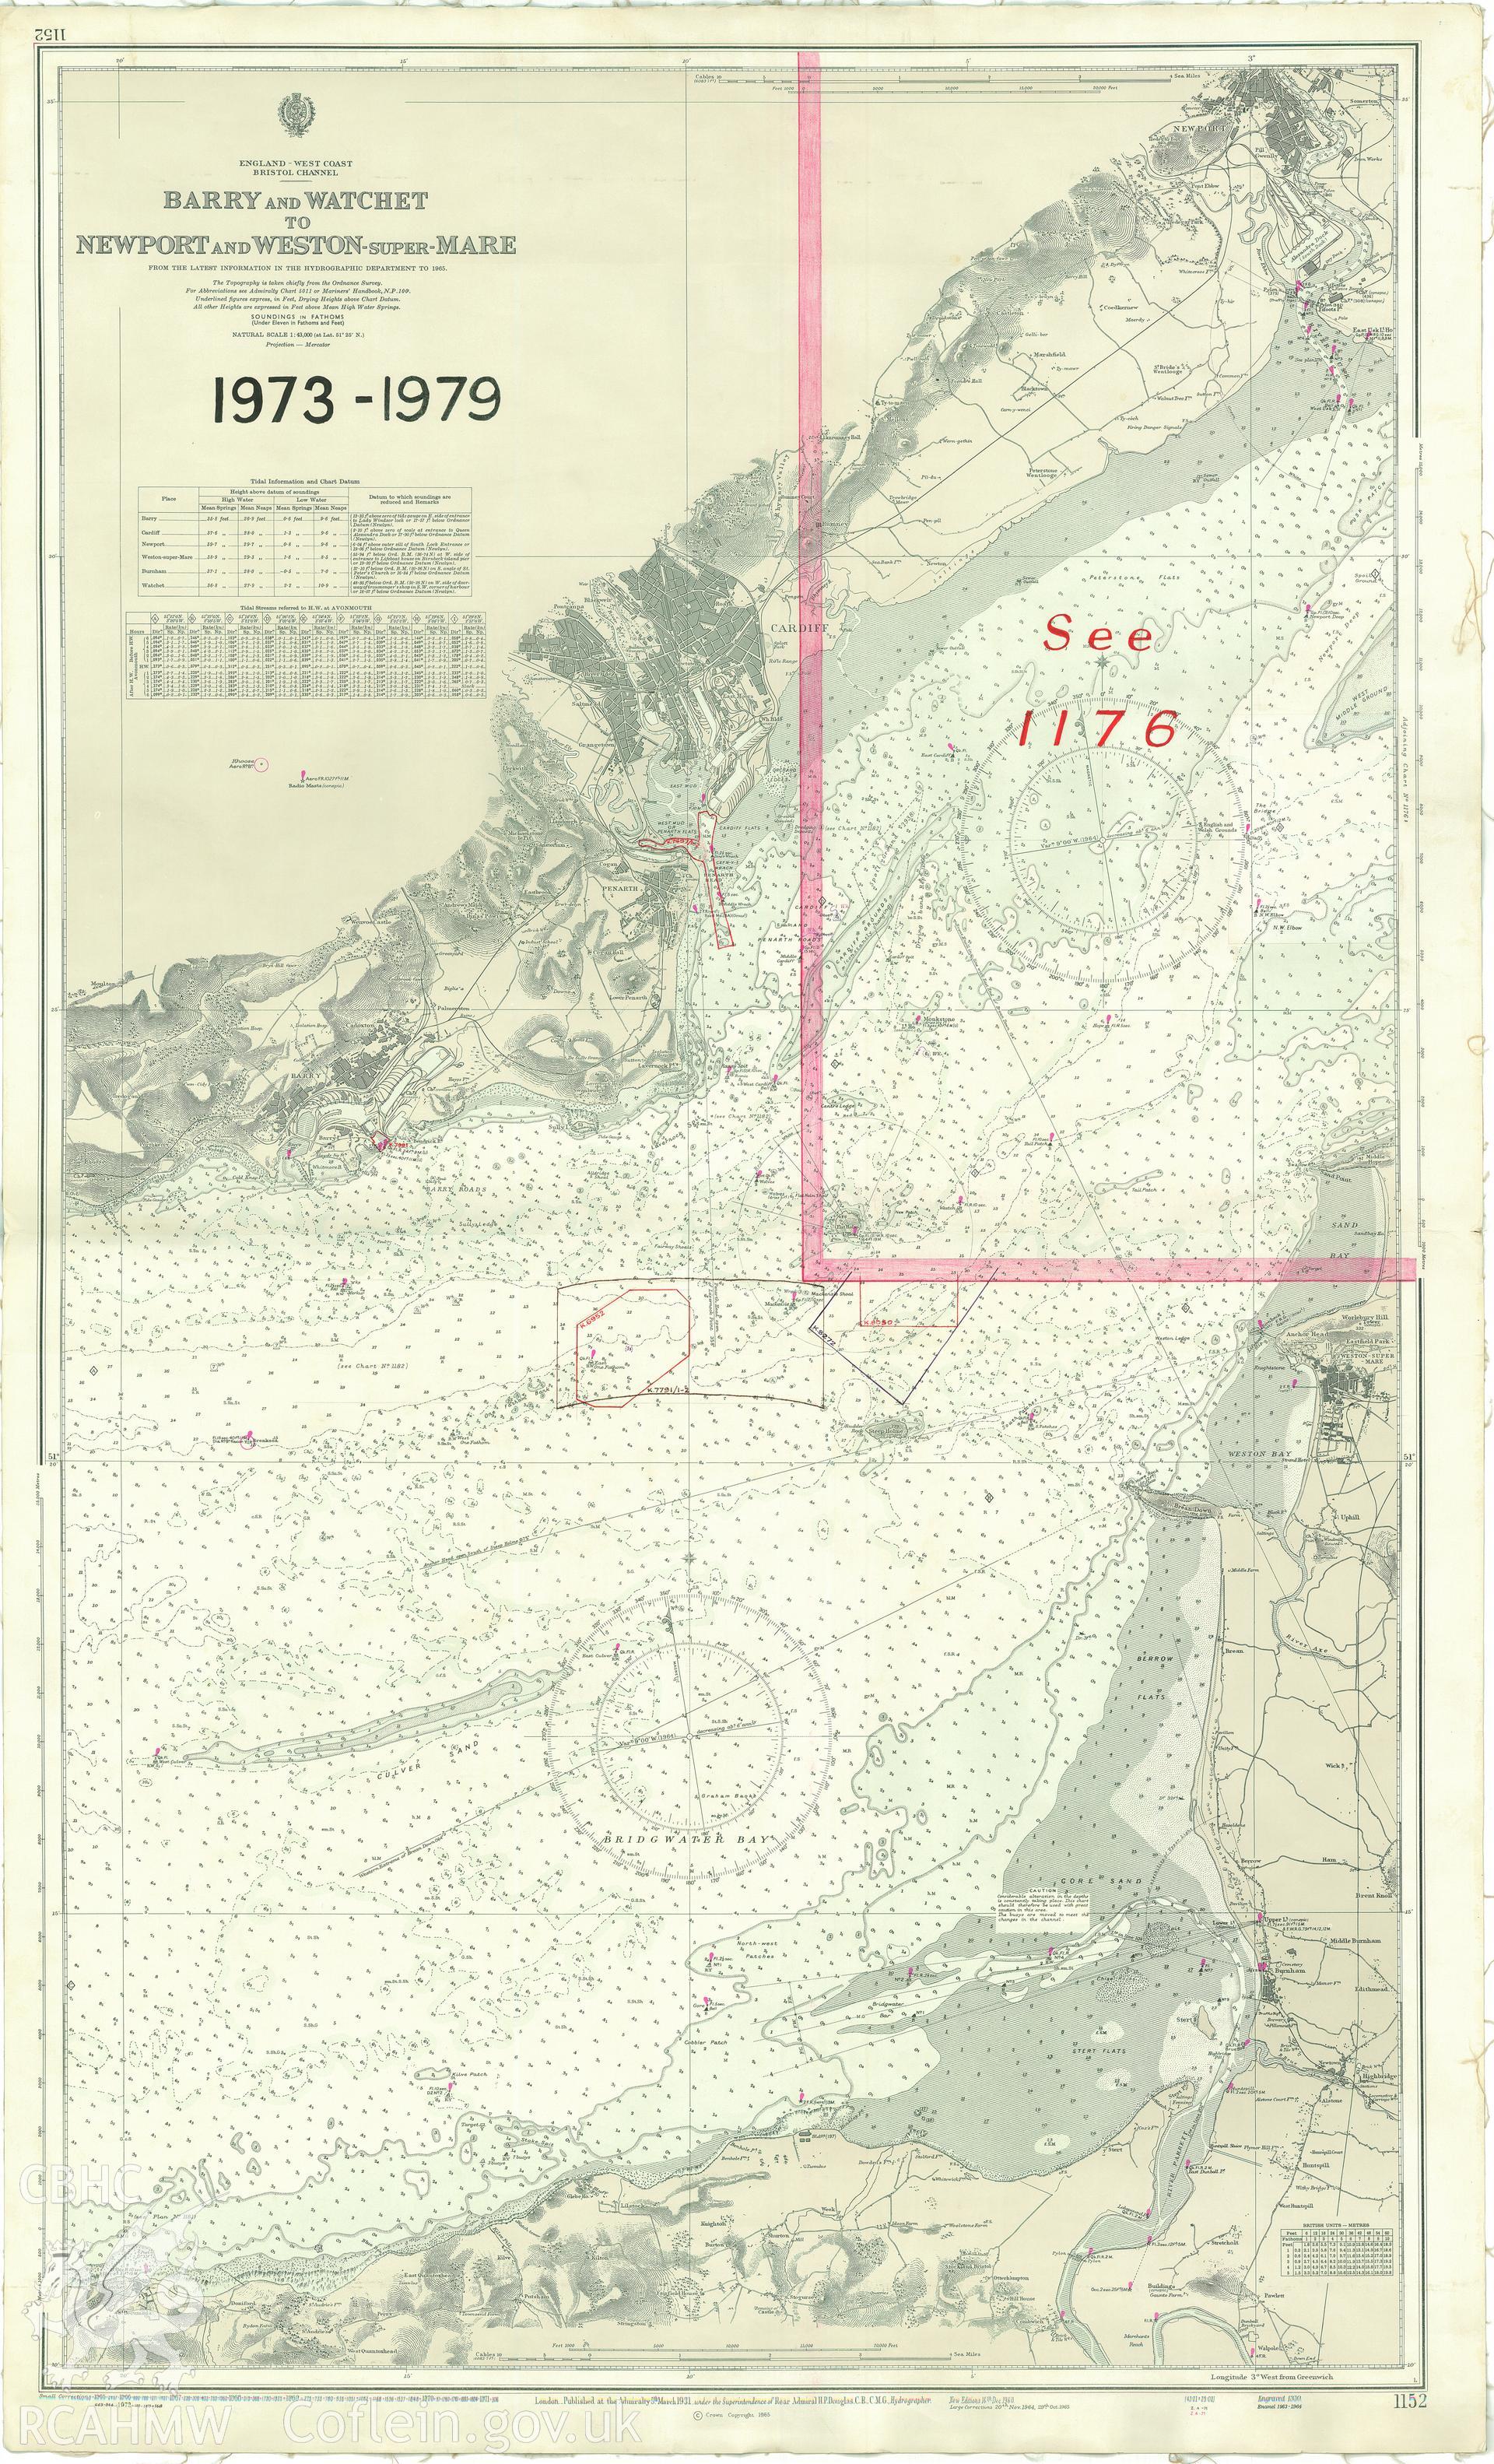 Scanned original image of an annotated Admiralty chart of Barry and Watchet to Newport and Weston-Super-Mare. Originally published 5 March 1931, with large corrections made 20 November 1964 and 29 October 1965. Original Hydrographic Office reference number was 'Index1930-1979-1152'.